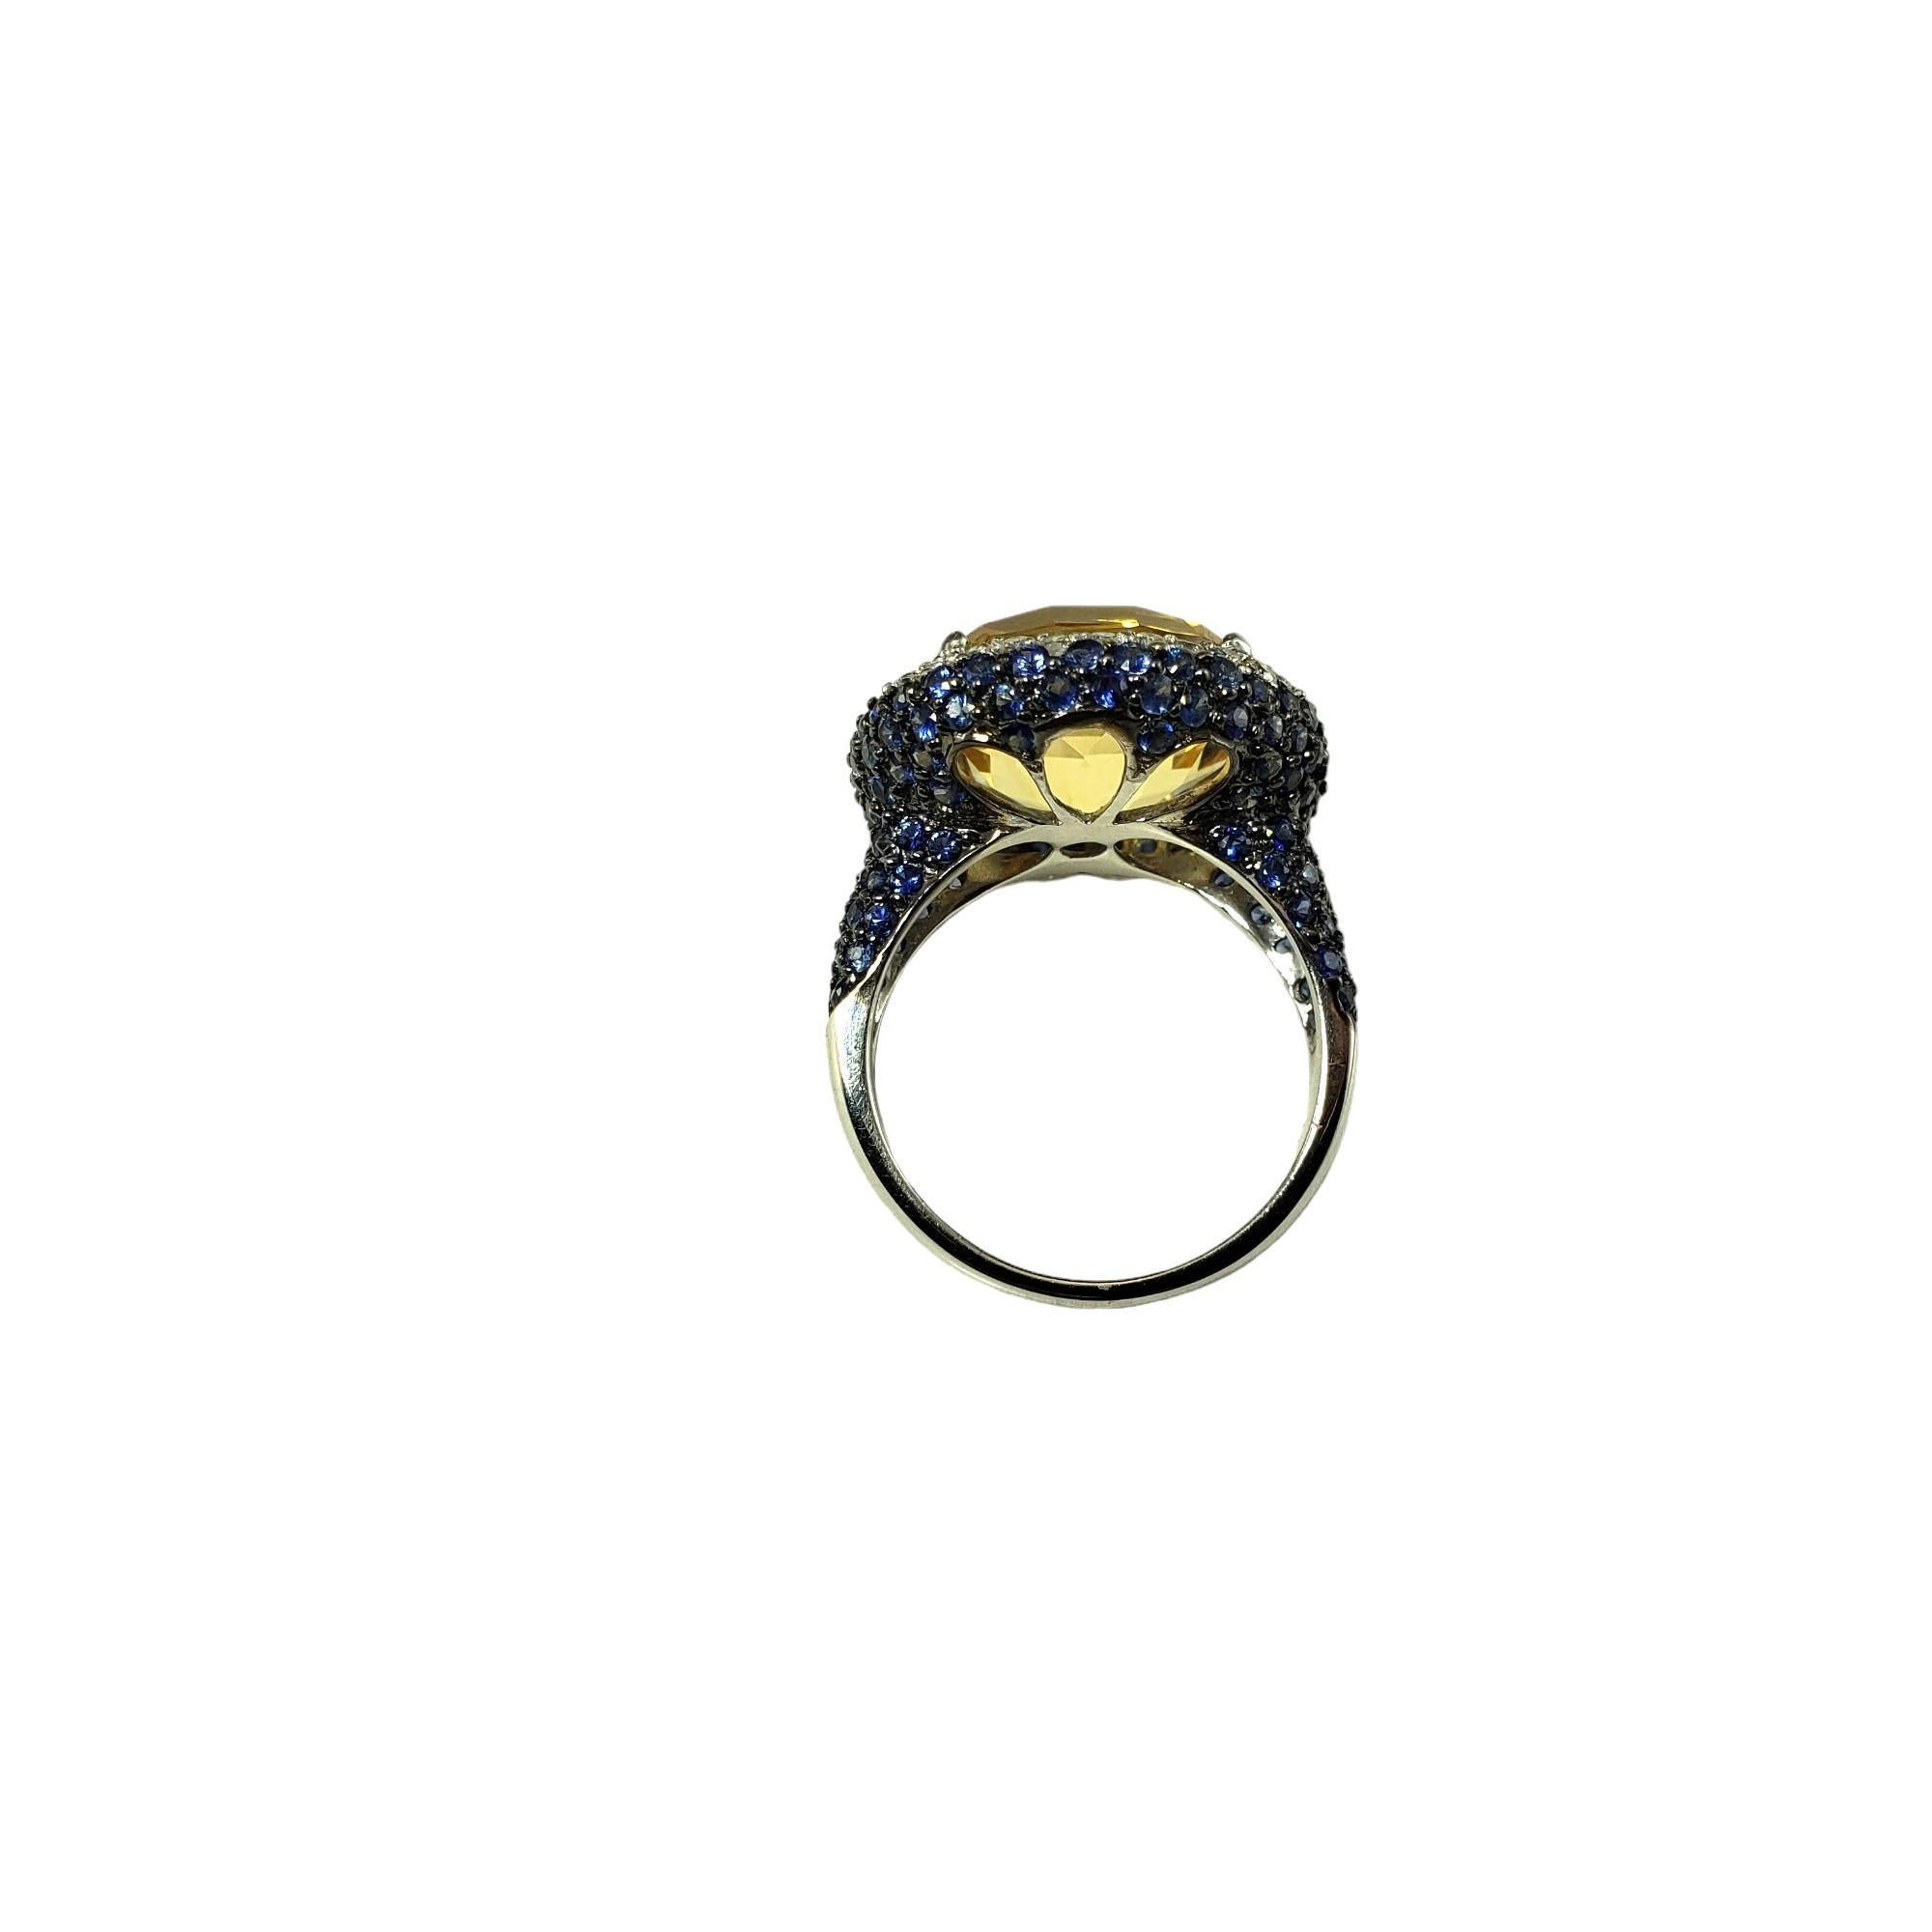 14K Gold Citrine, Diamond, Sapphire Ring Size 7.25 #16339 In Good Condition For Sale In Washington Depot, CT